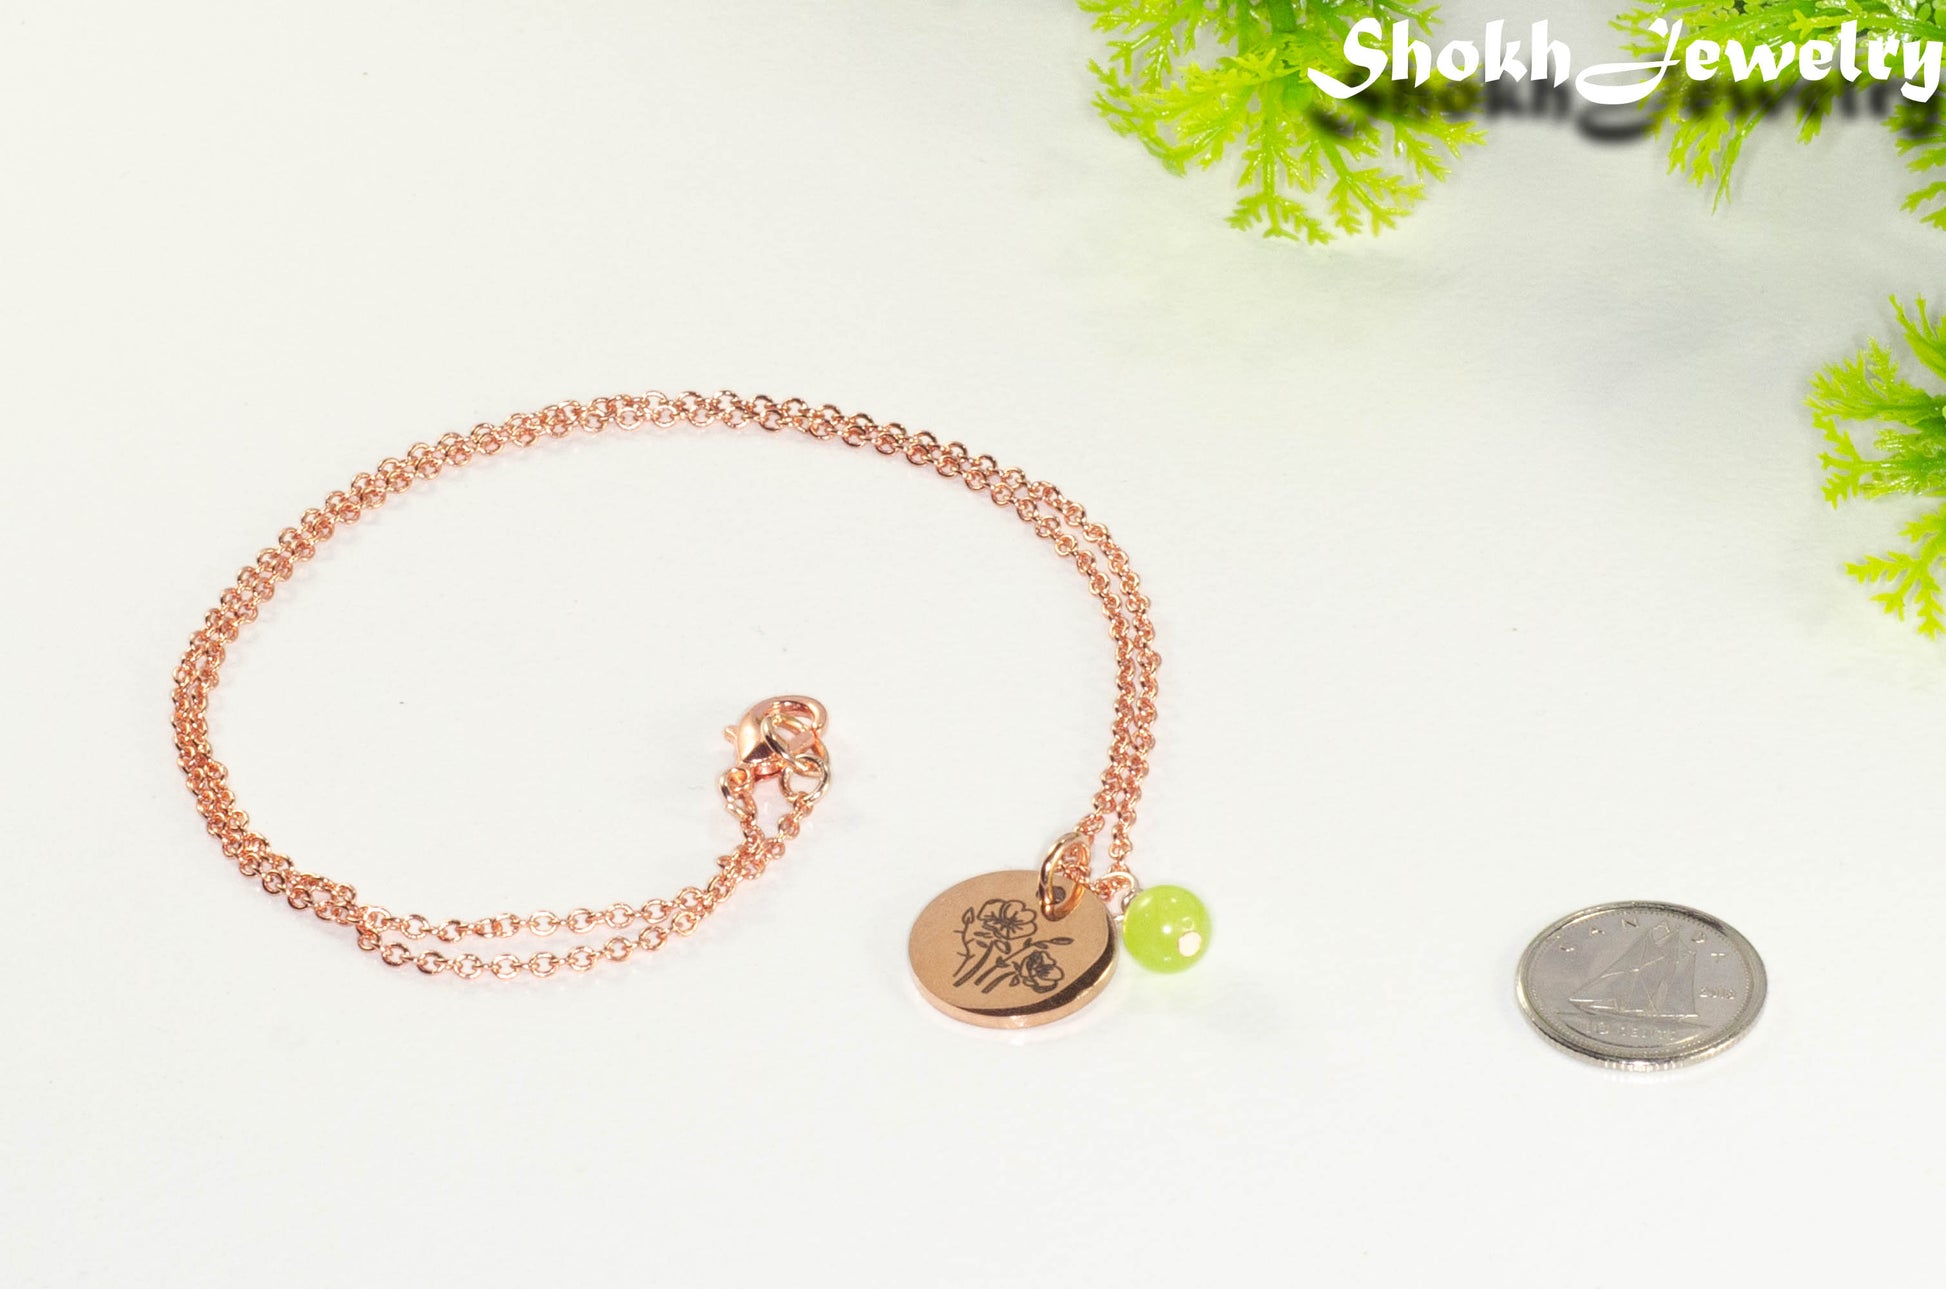 Rose Gold Plated August Birth Flower Necklace with Peridot Birthstone Pendant beside a dime.